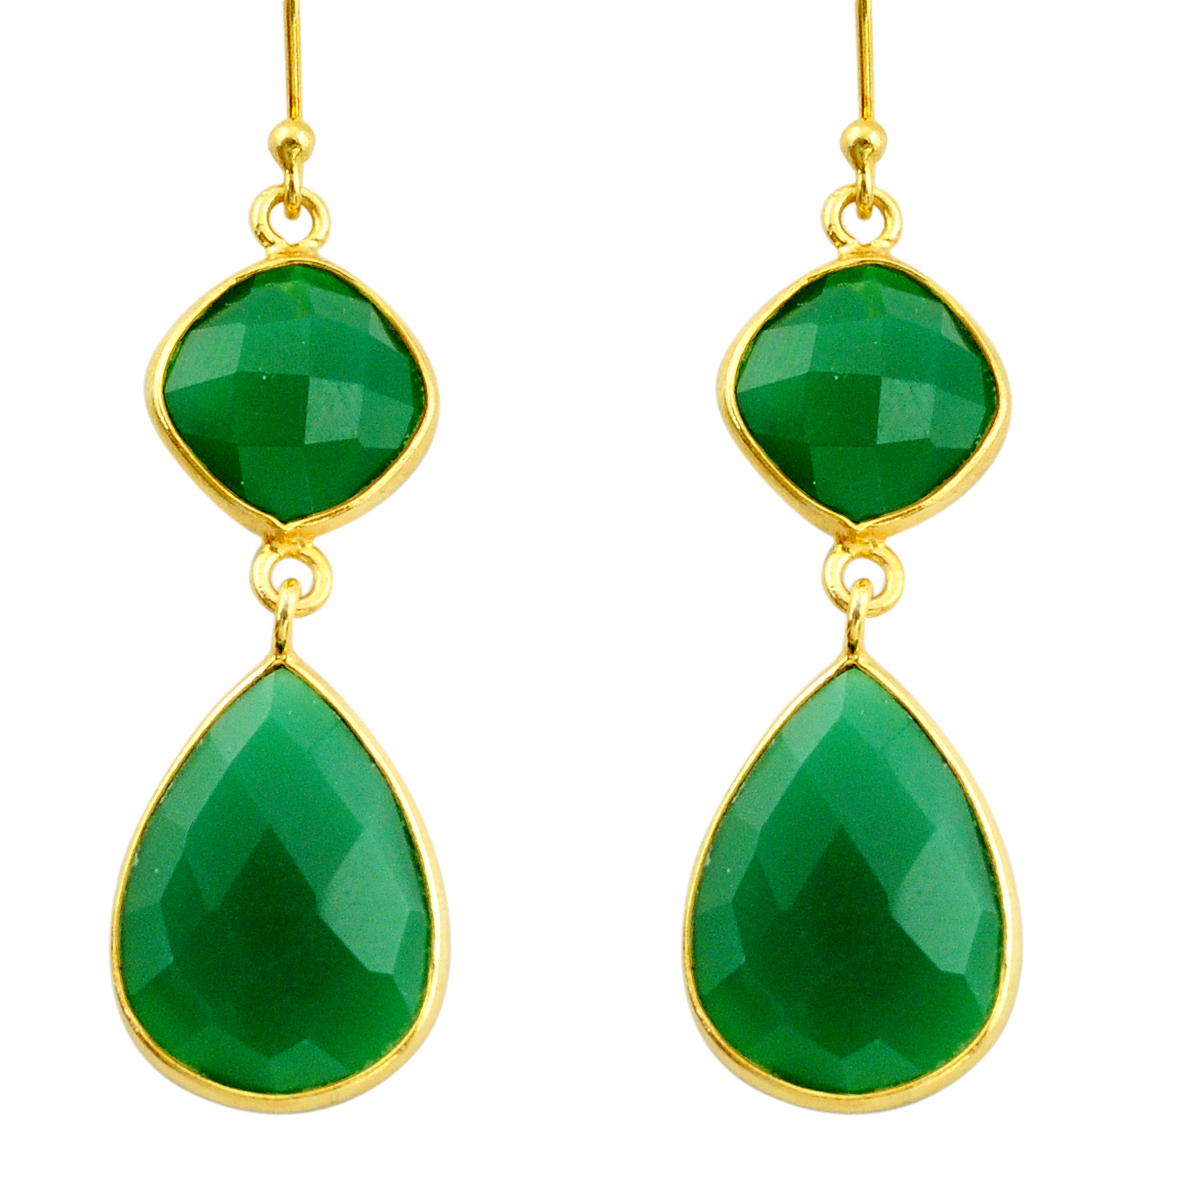 A pair of 925 silver gilt drop earrings set with faceted cut aventurine, L. 5.3cm.